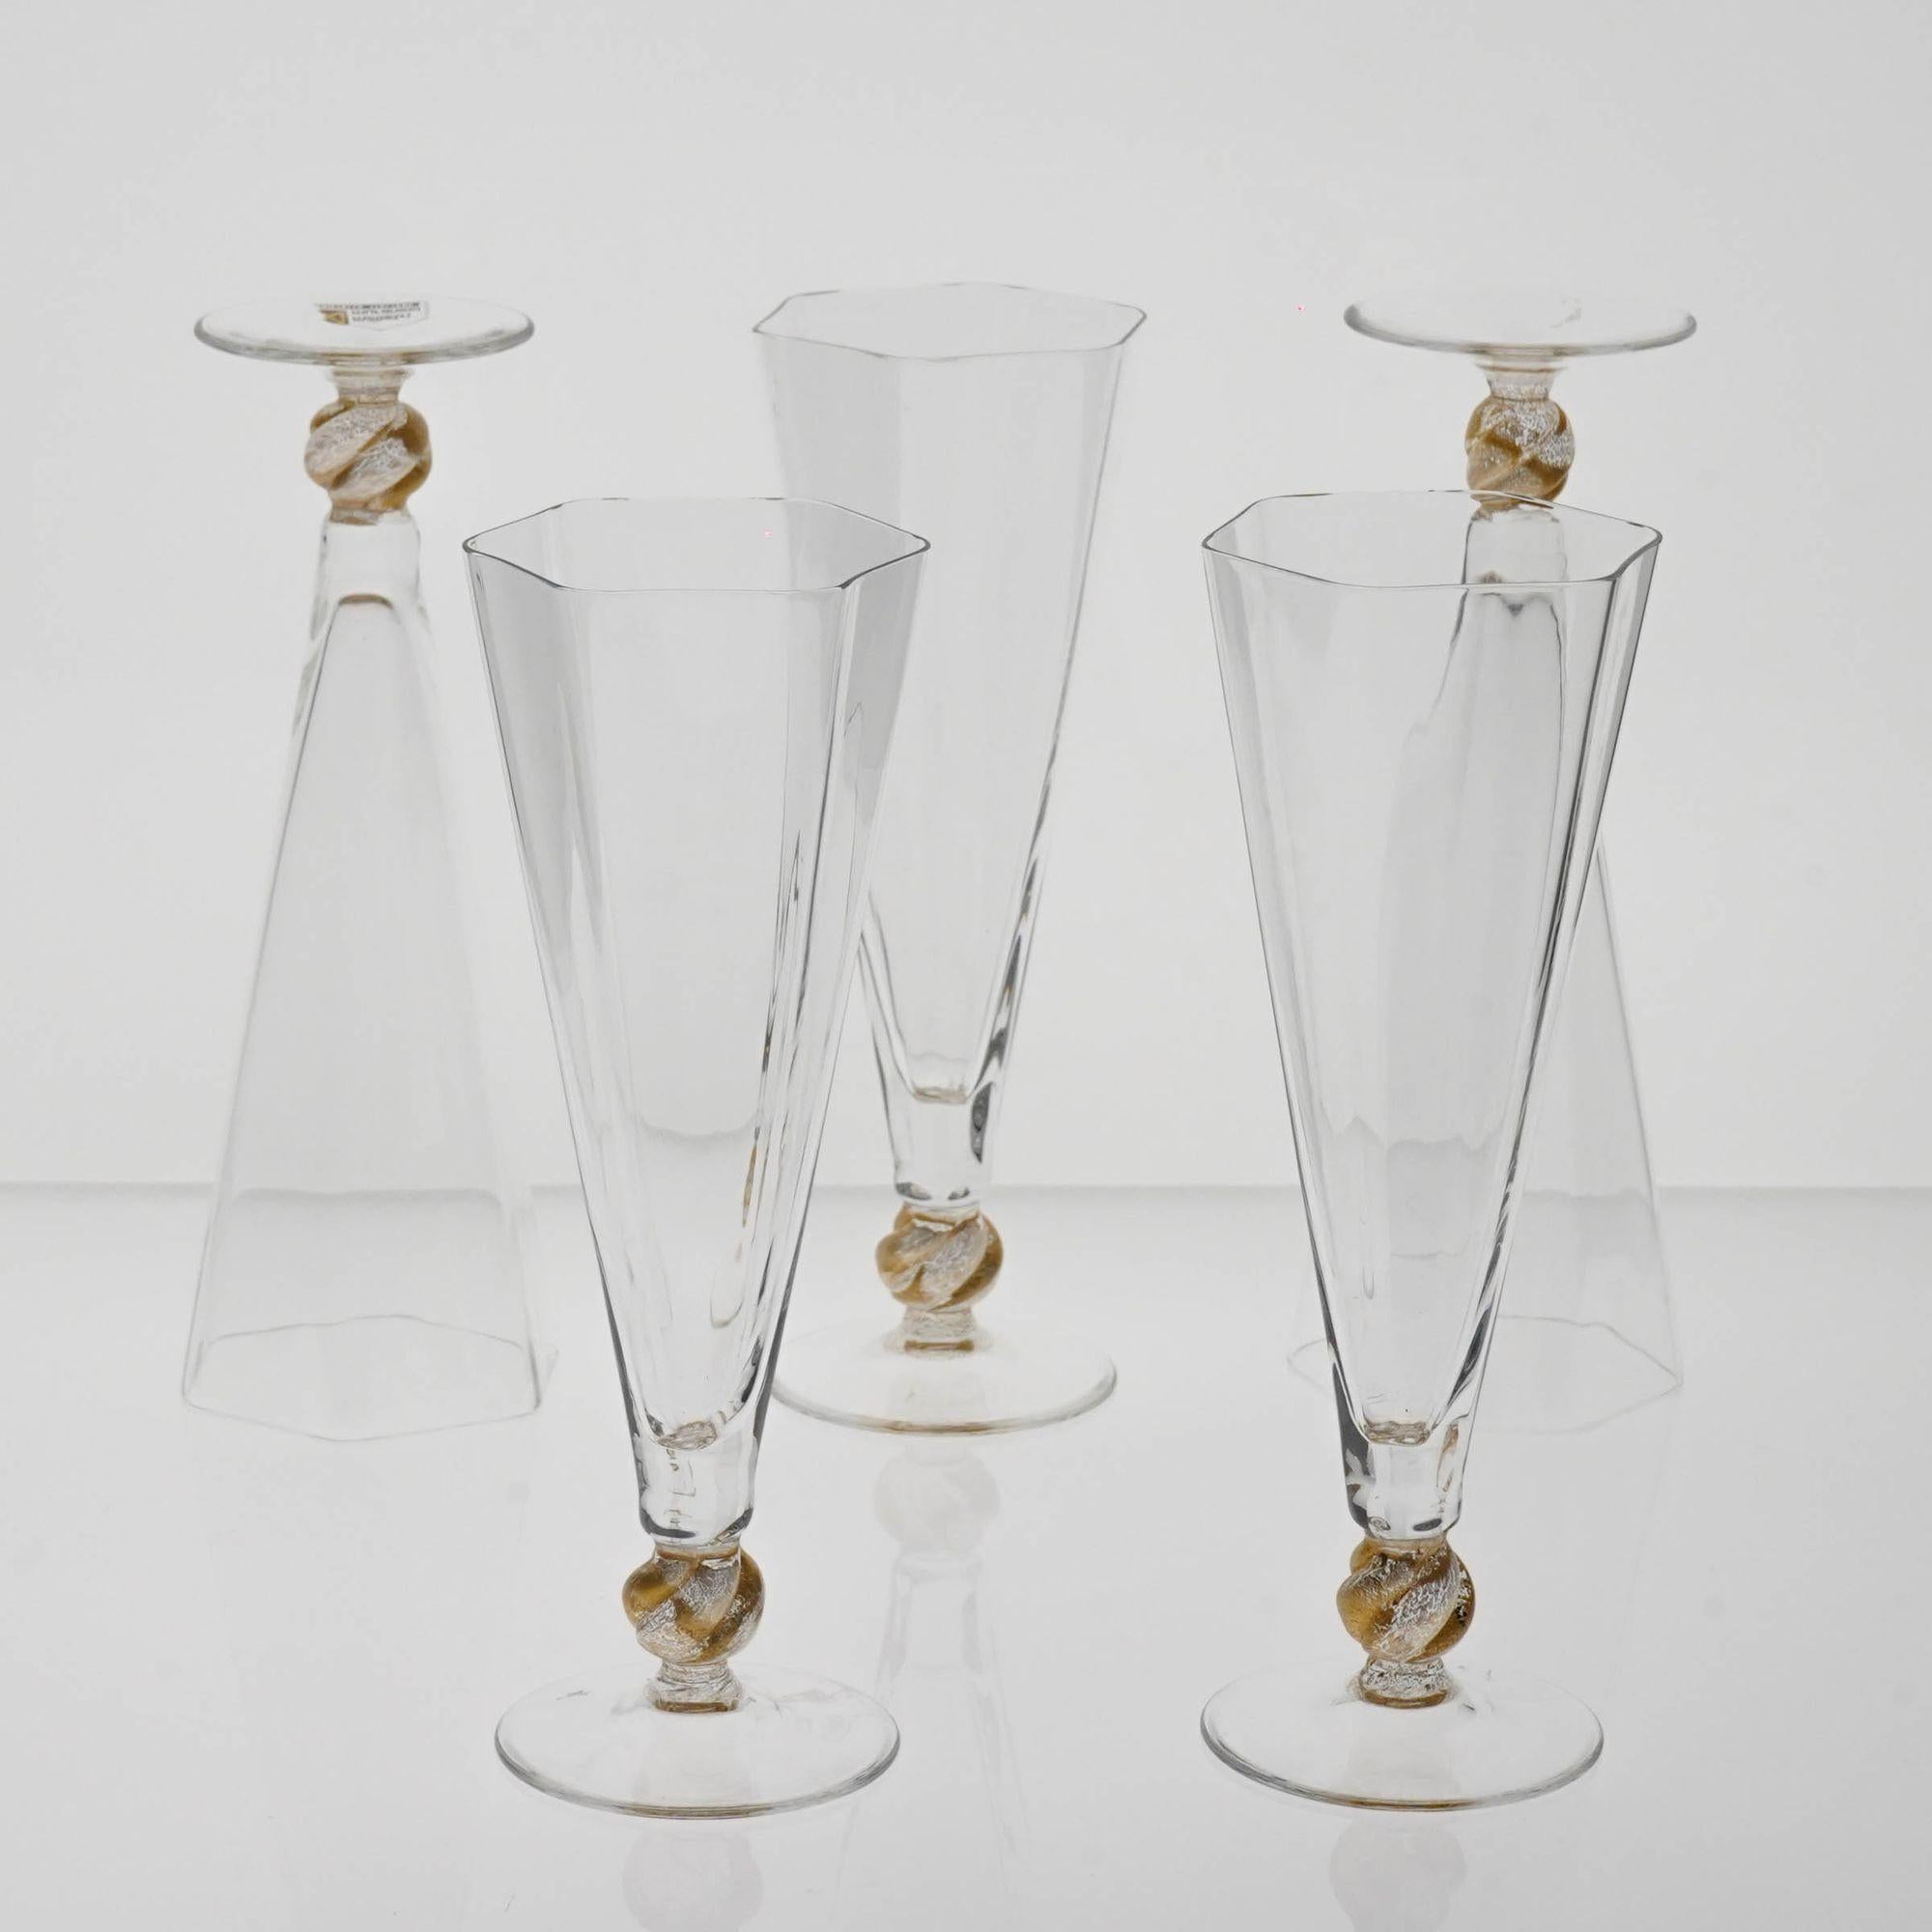 Set of 5 Cenedese Hexagonal Flutes, Gold Accent, Signed, Unique For Sale 7